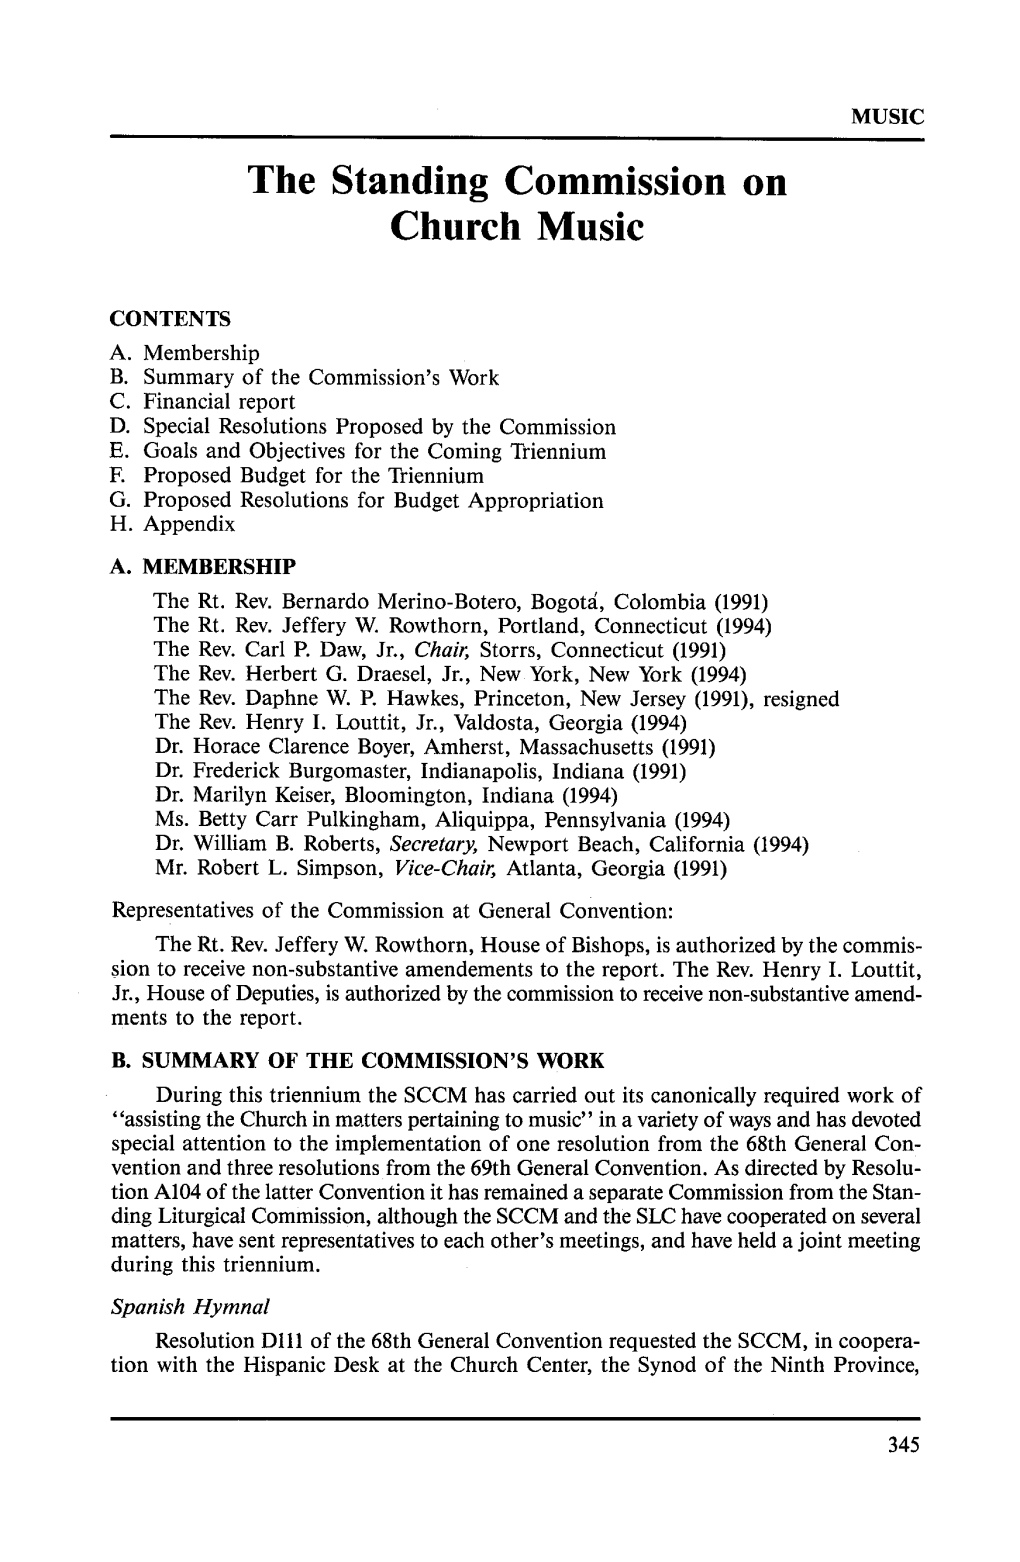 The Standing Commission on Church Music